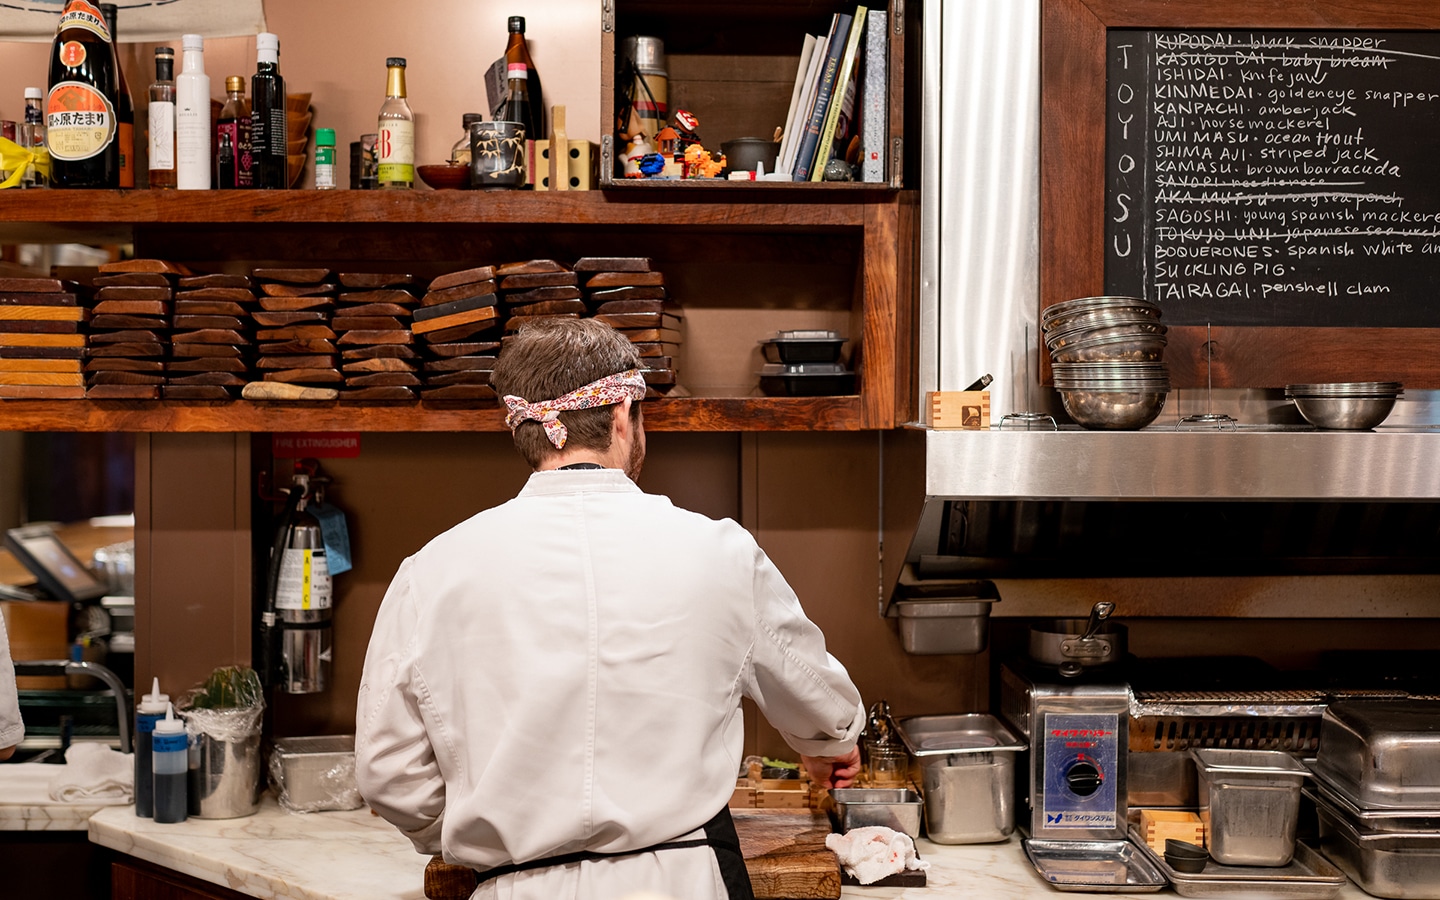 A chef in a kitchen preparing food for a private dining event.